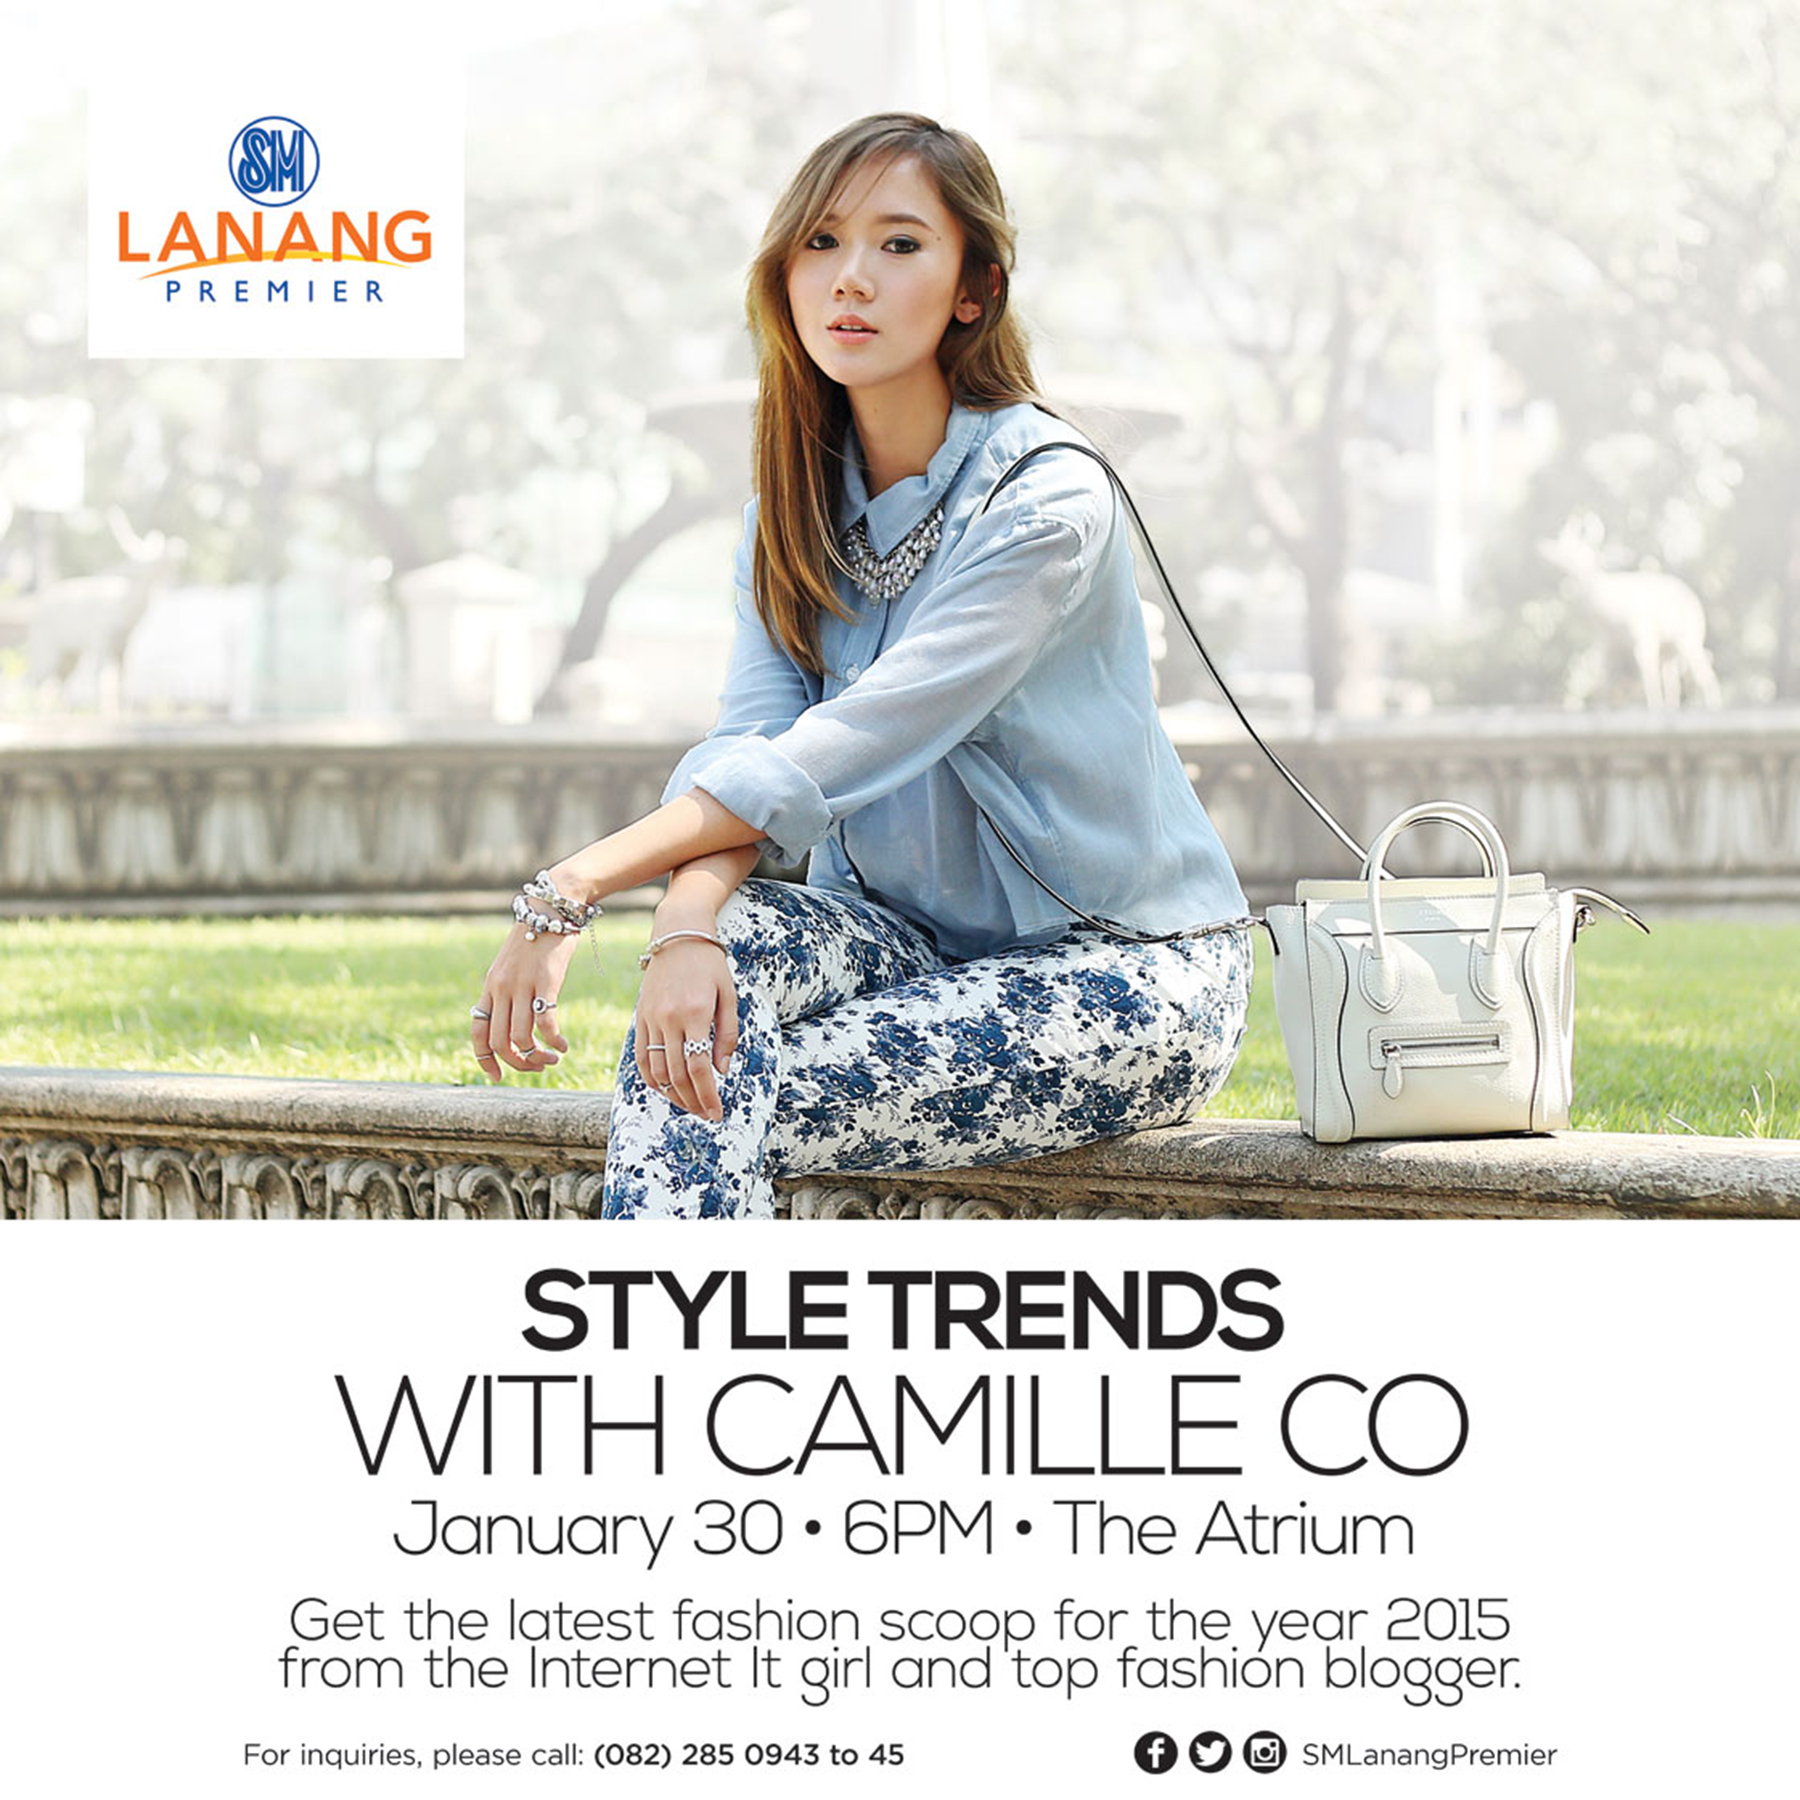 Style Trends With Camille Co At SM Lanang